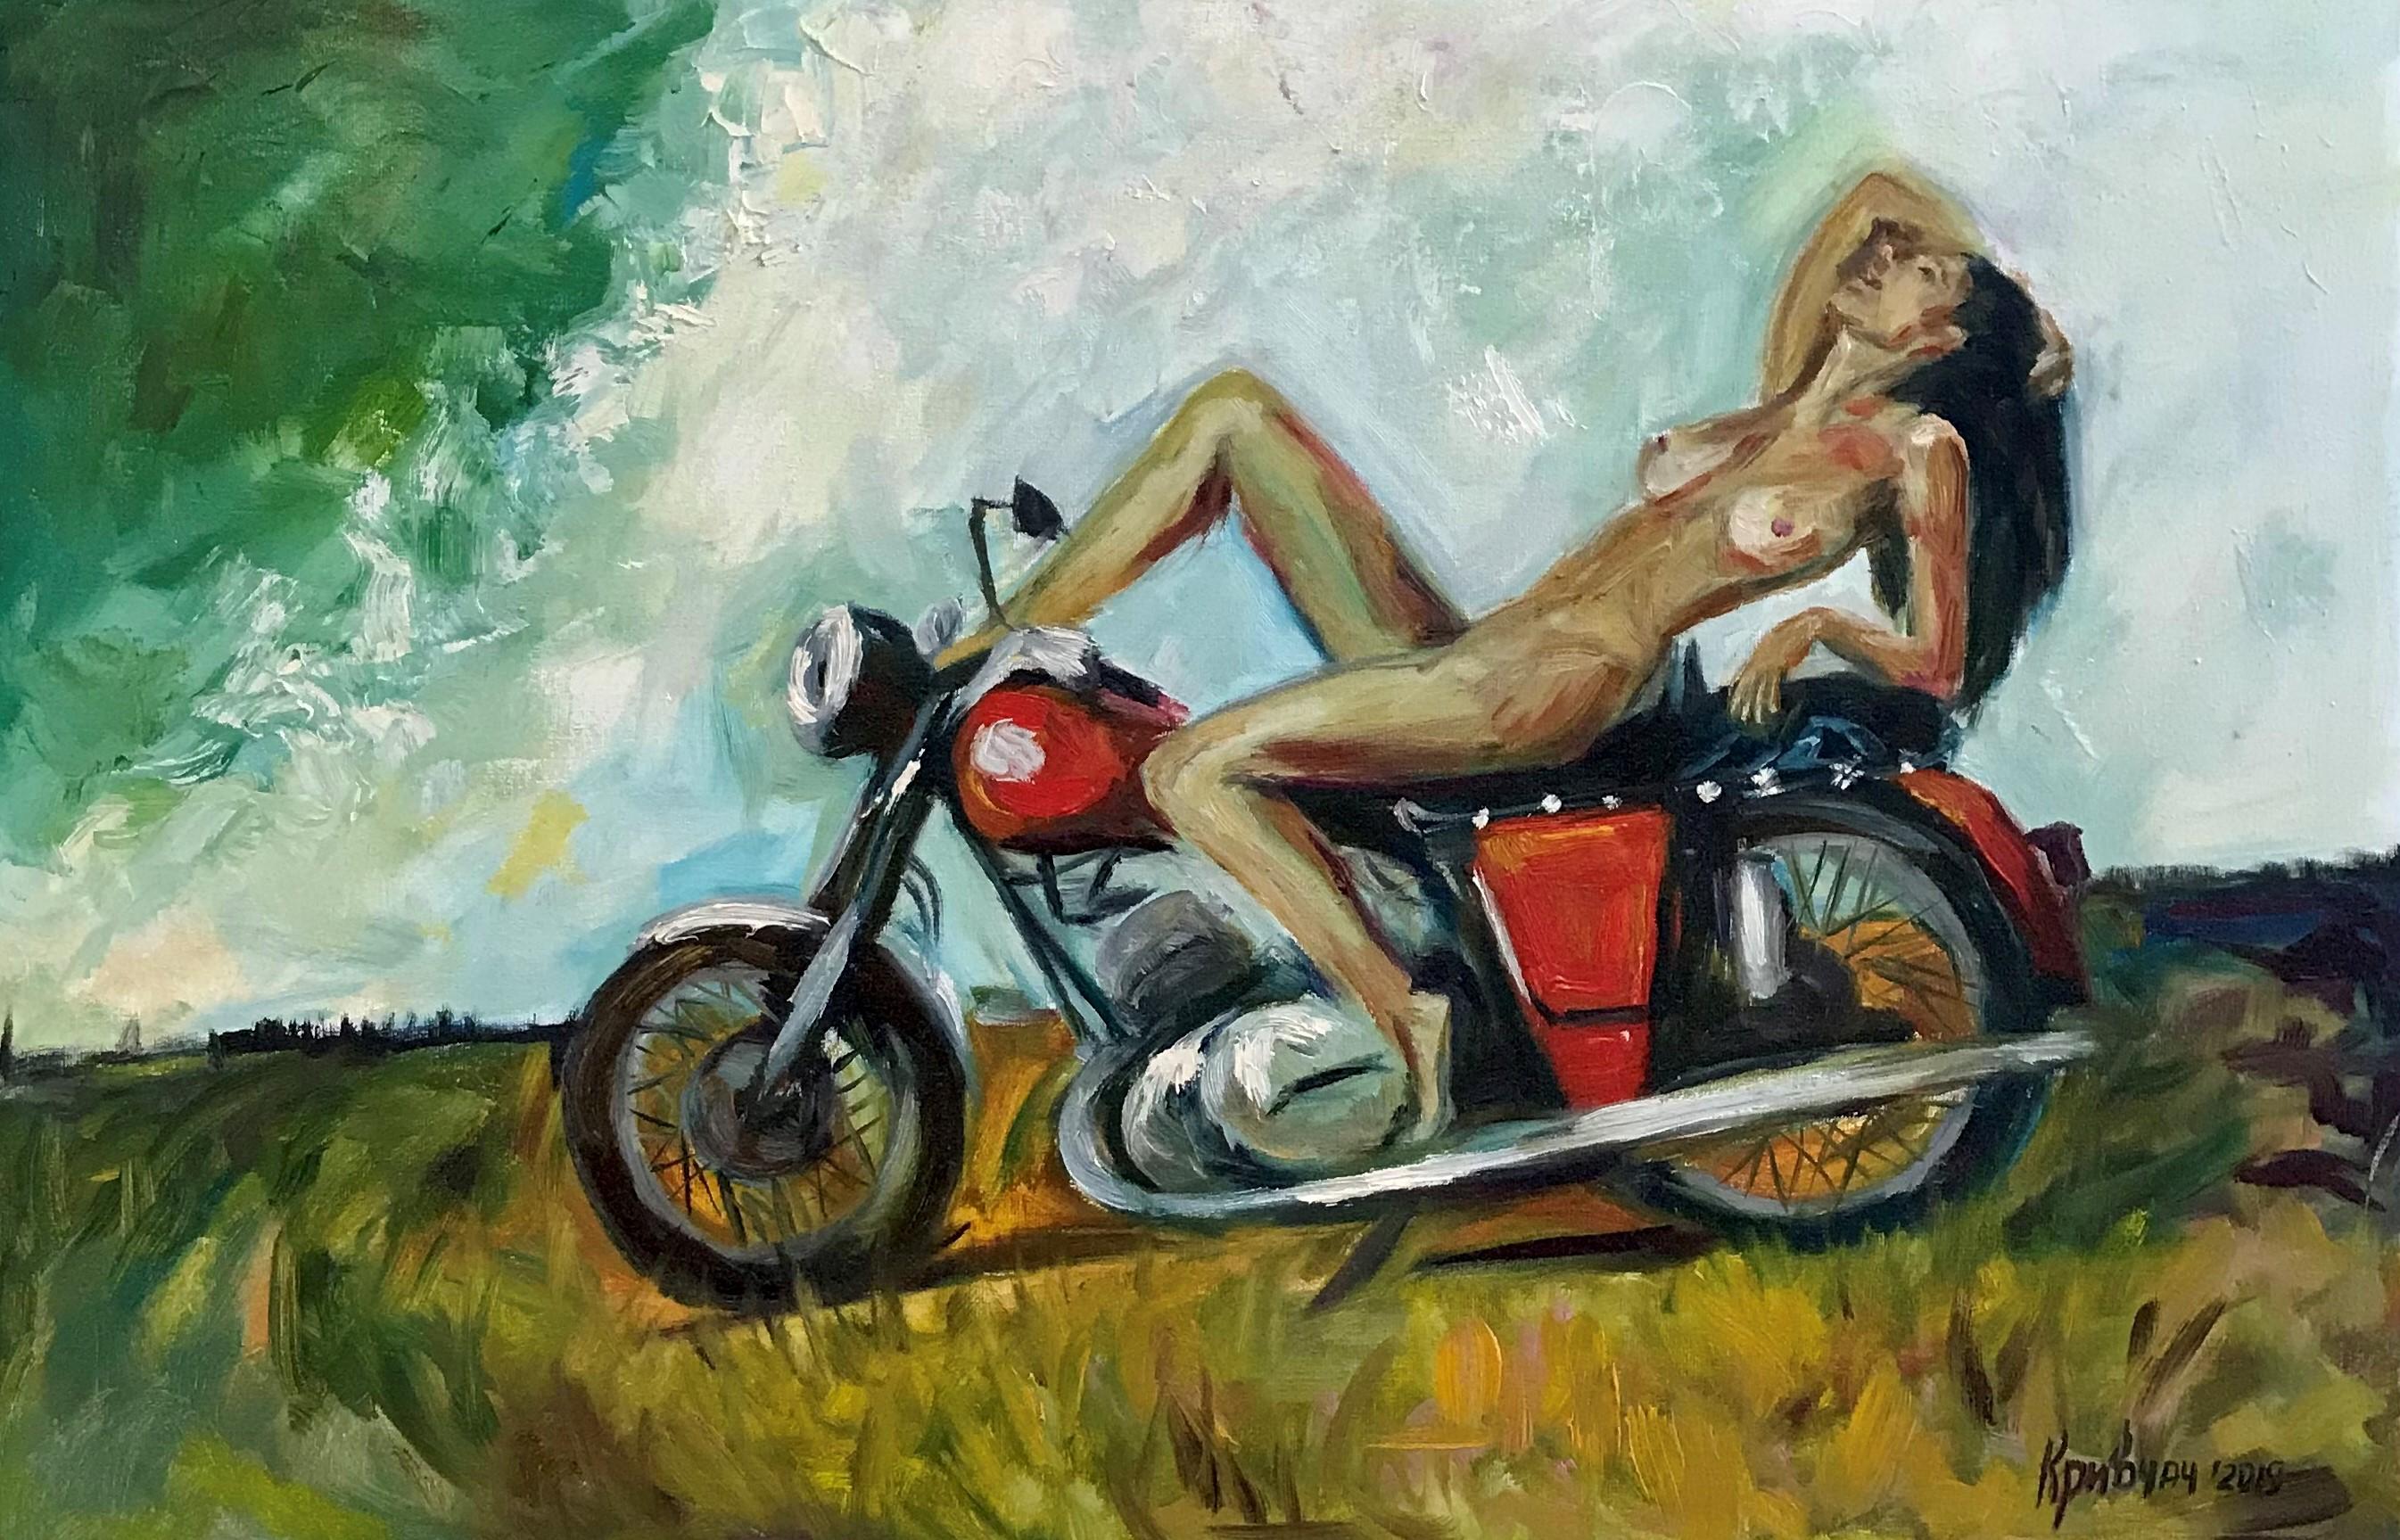  Kateryna Krivchach Landscape Painting - Girl on a motorcycle